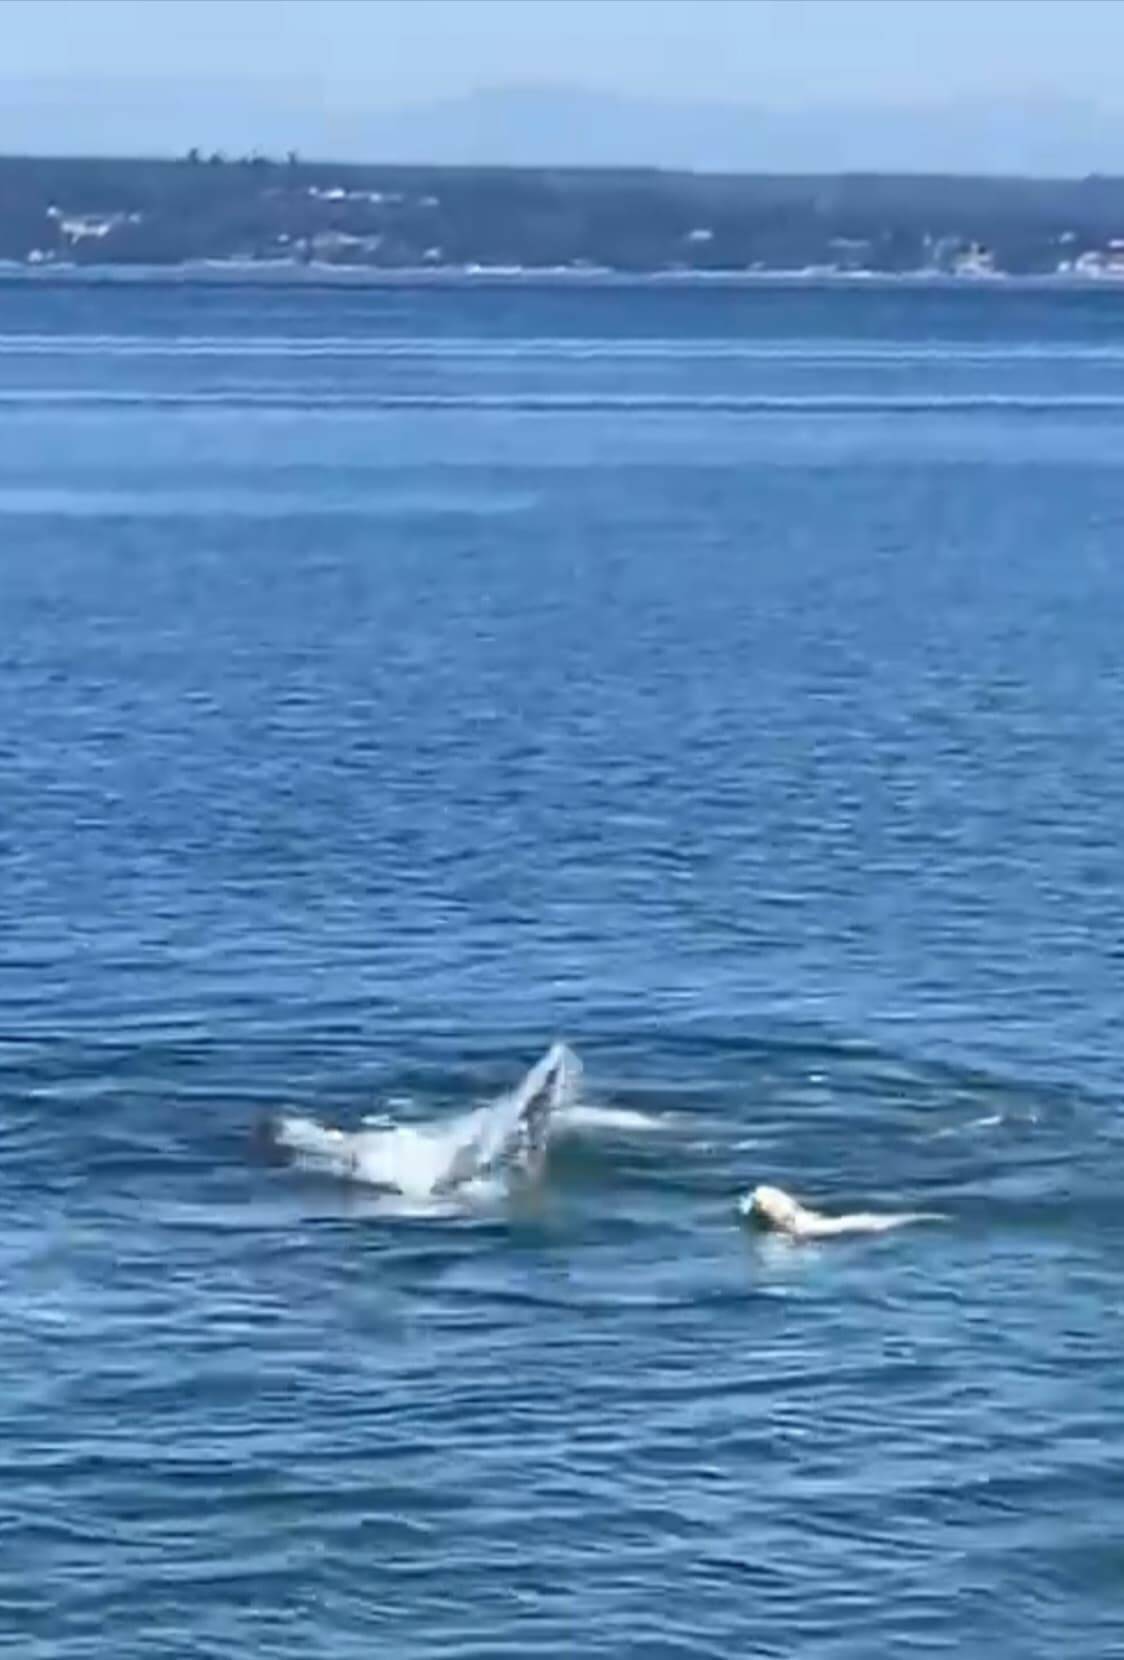 Tippy the golden retriever from South Whidbey went viral when she splashed around with a gray whale a few weeks ago. (Screenshot provided)